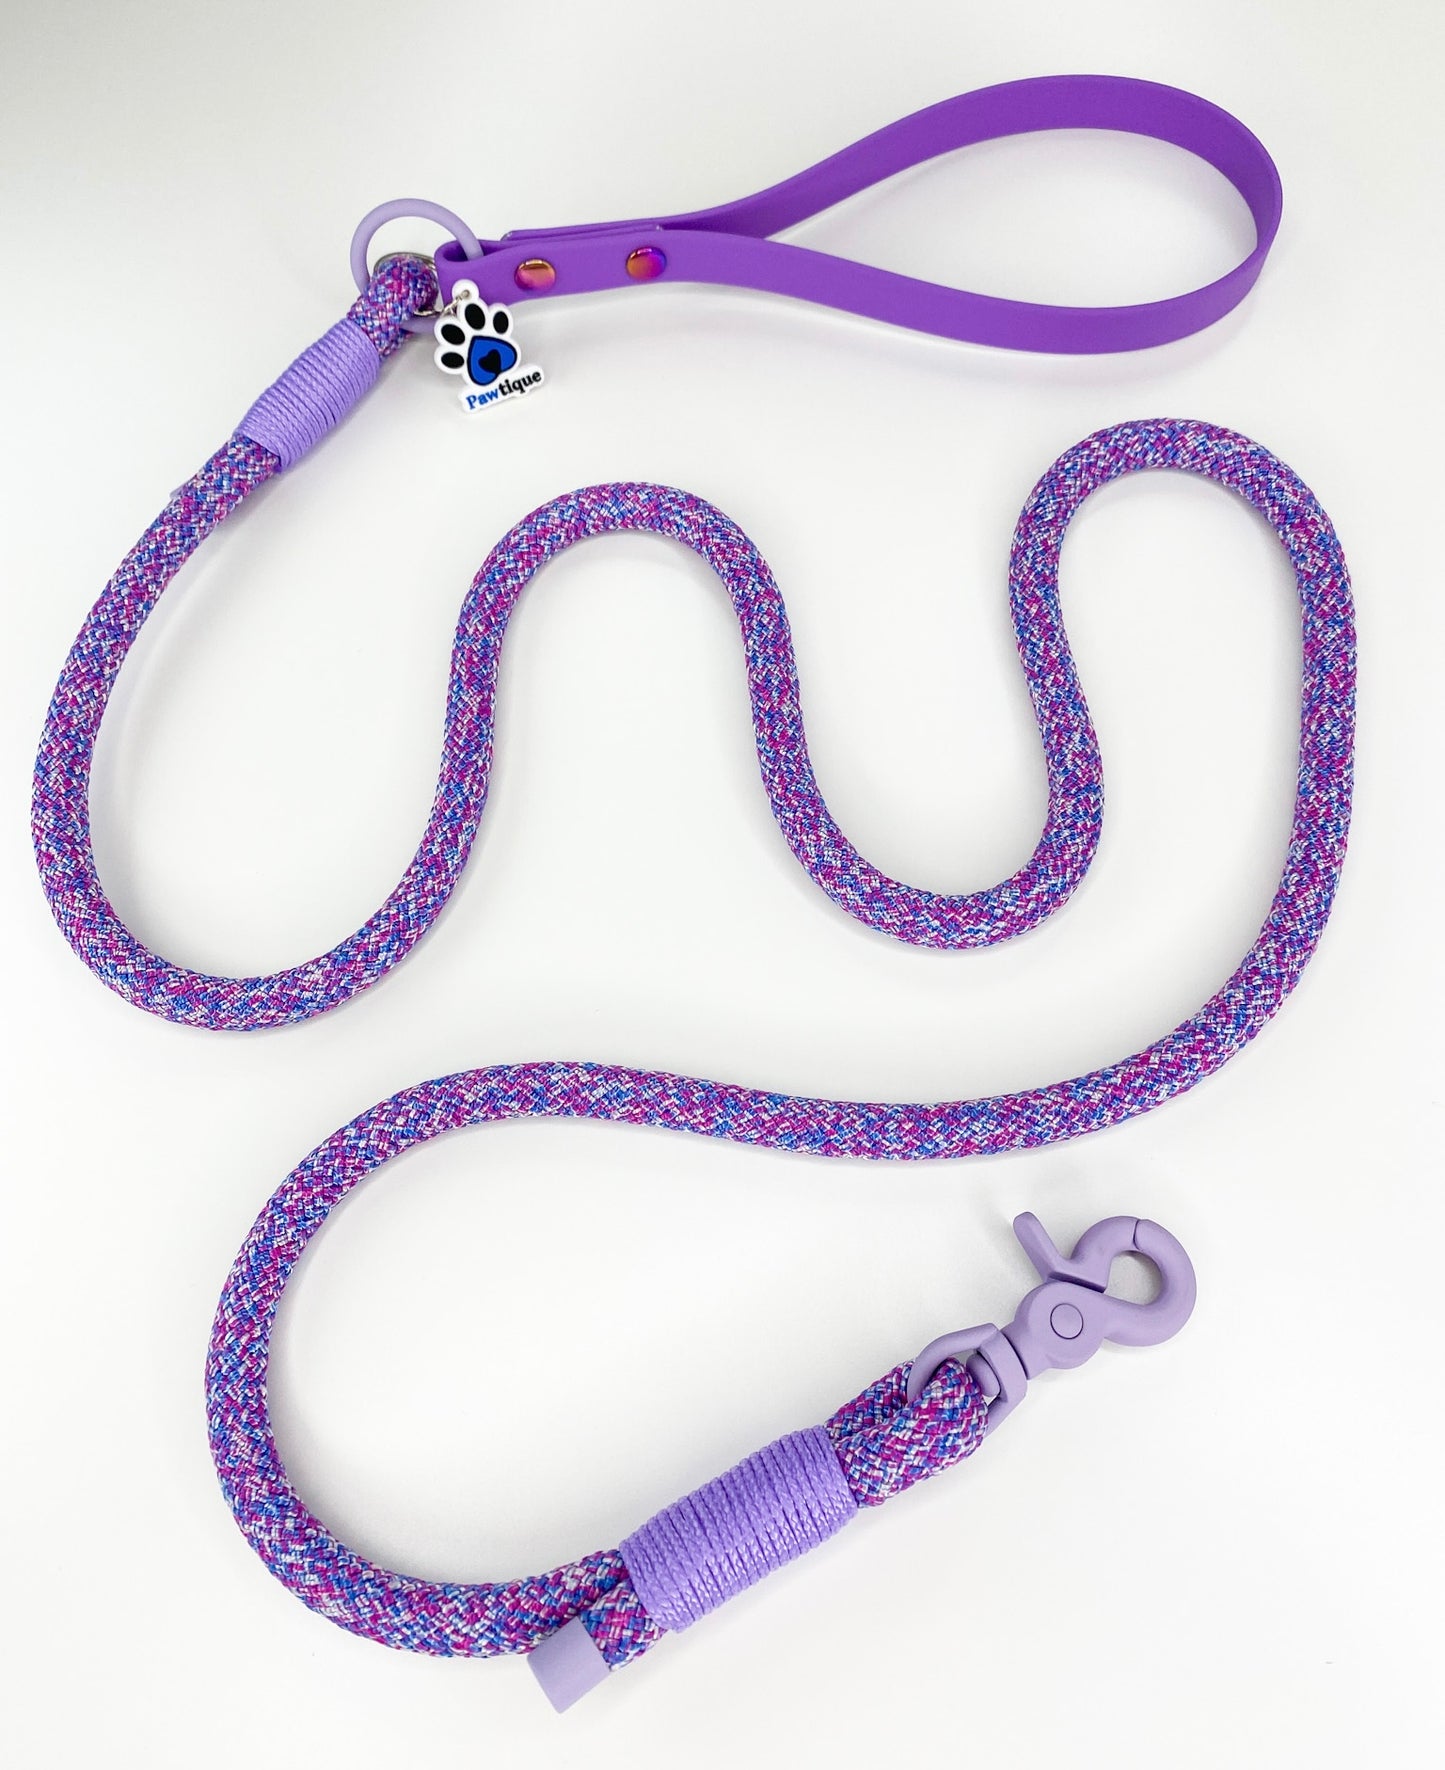 Cosmos Rope lead